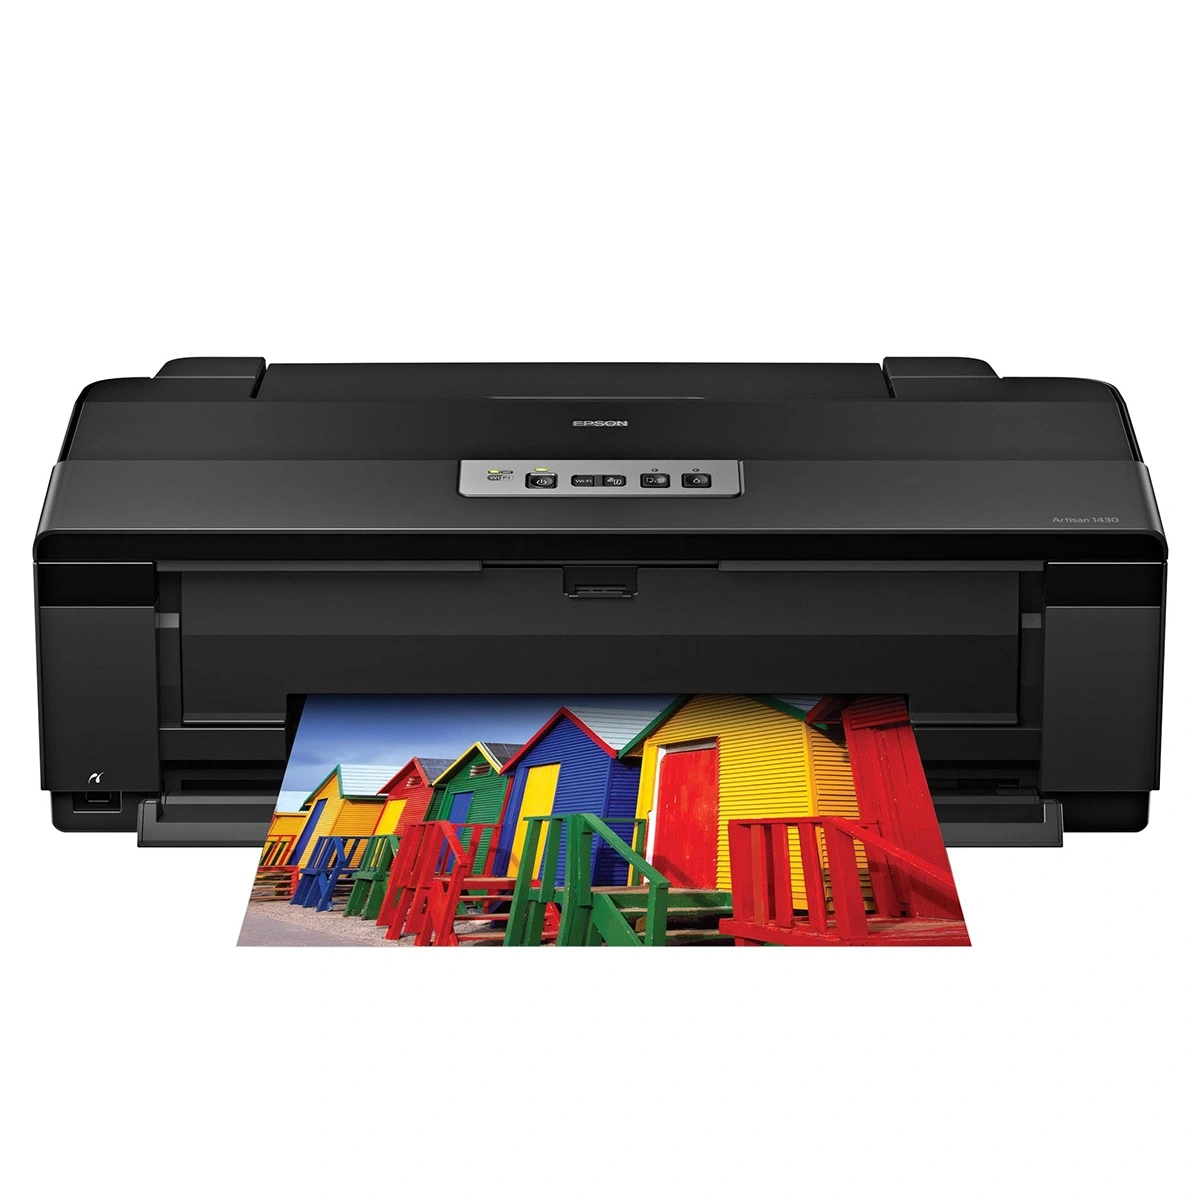 Epson Artisan 1430 Printer Printing Picture Of Colorful Buildings